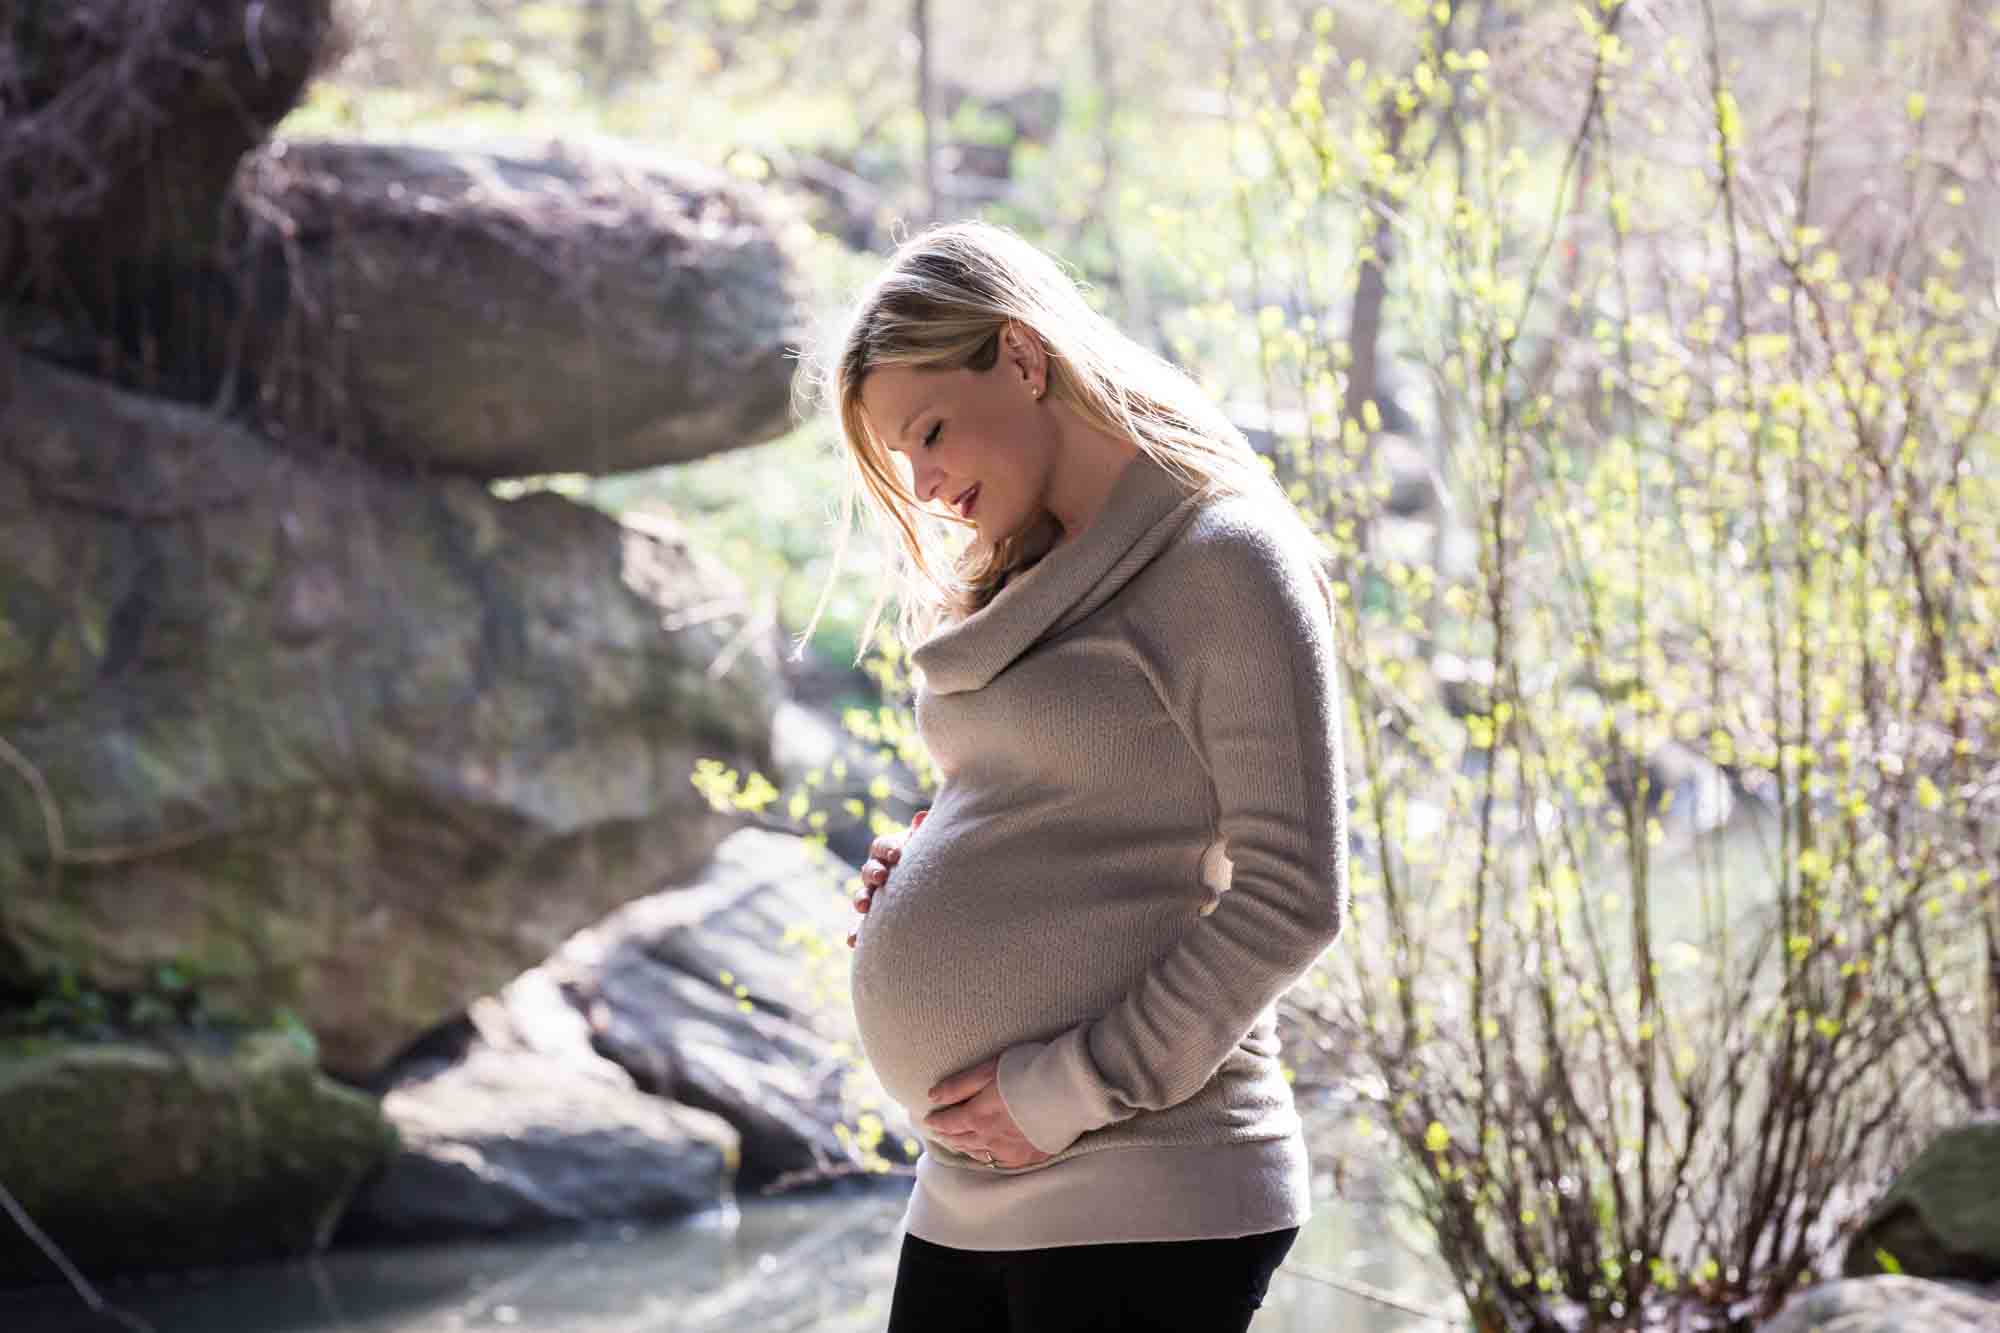 Maternity portrait in park for an article on the best family portrait poses